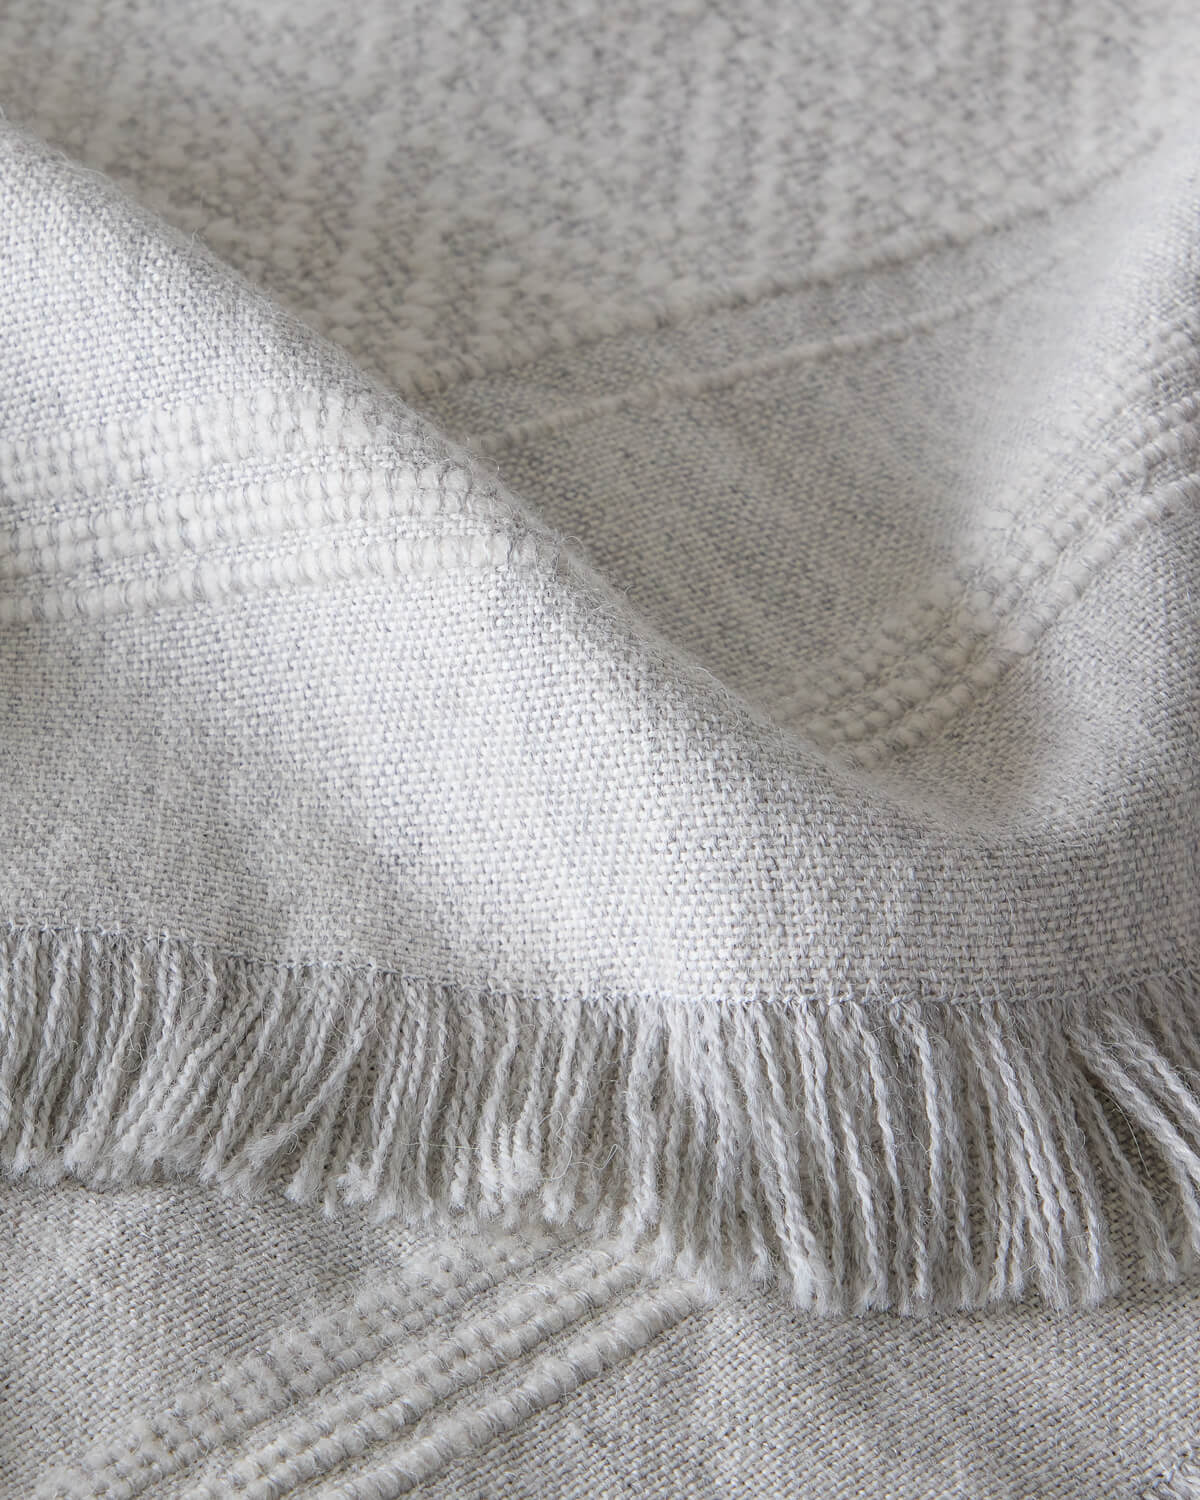 
                  
                    Detail of La Marea super soft baby alpaca blanket by Fairkind handwoven in Peru with textured stripes and fringe.
                  
                